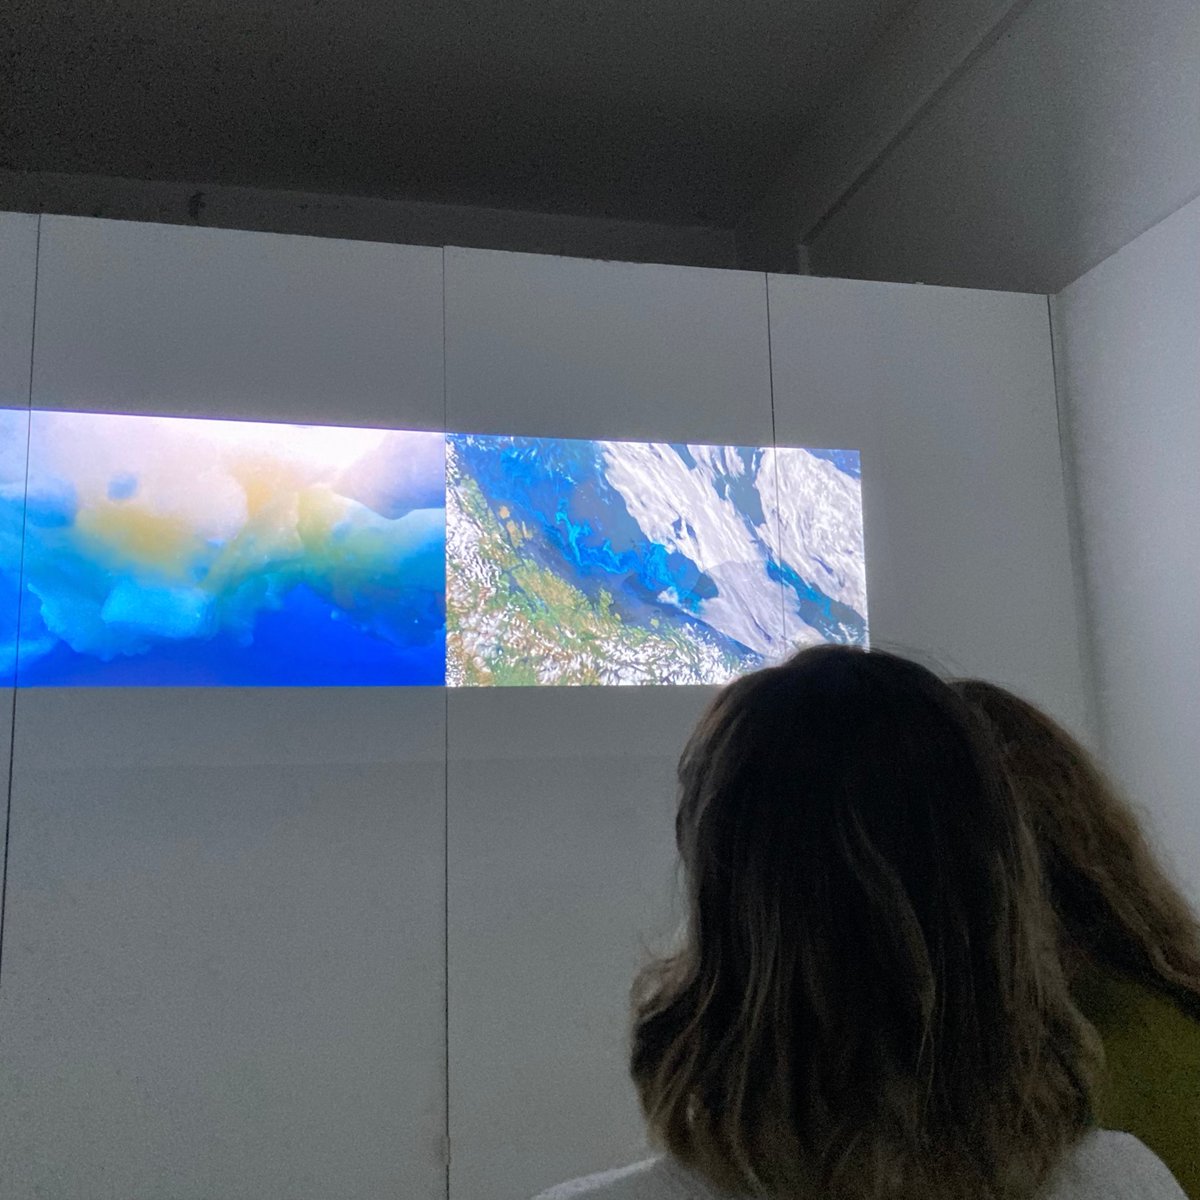 As above so below. Ice algae (old-growth forests of the high Arctic) in amazing videos by Daniel Vogedes/ @MareIncog @UiTNorgesarktis, with @NASAEarth imagery, in a hypnotic, scale-dissolving loop by @JenniferArgoArt @mapping_ocean exhibition at @newglasgowsoc for another week!